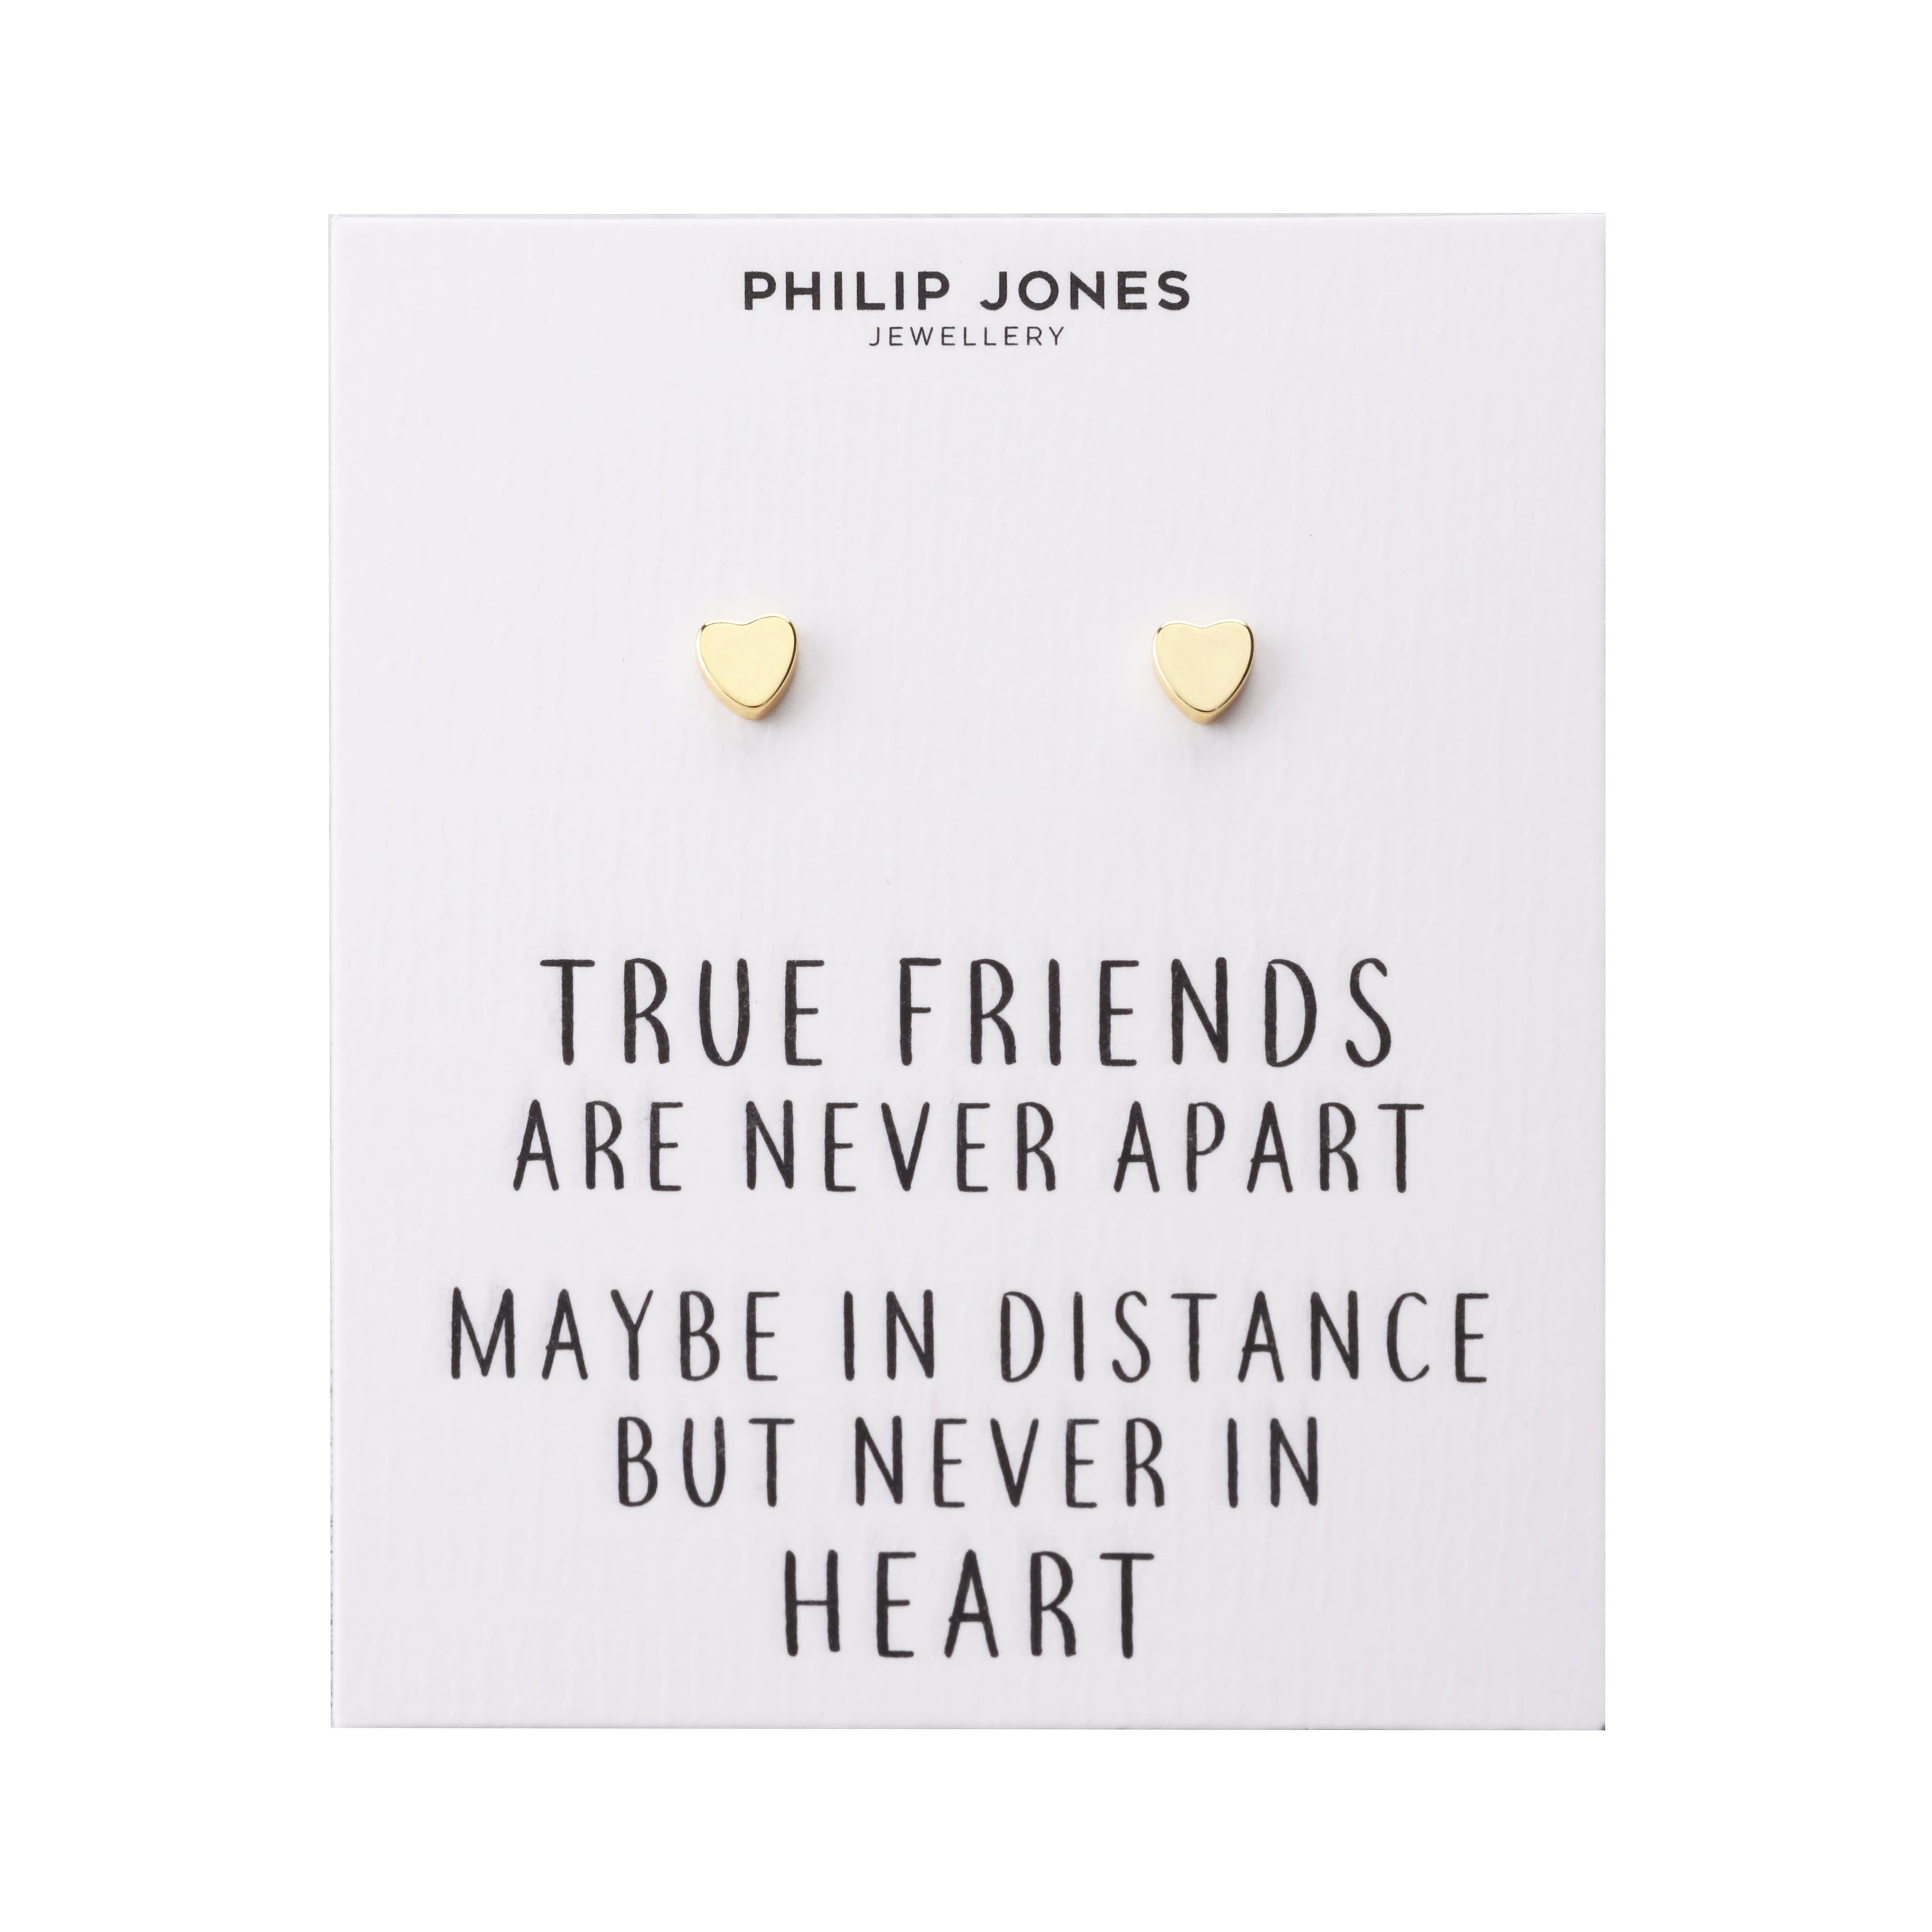 Gold Plated Heart Stud Earrings with Quote Card by Philip Jones Jewellery